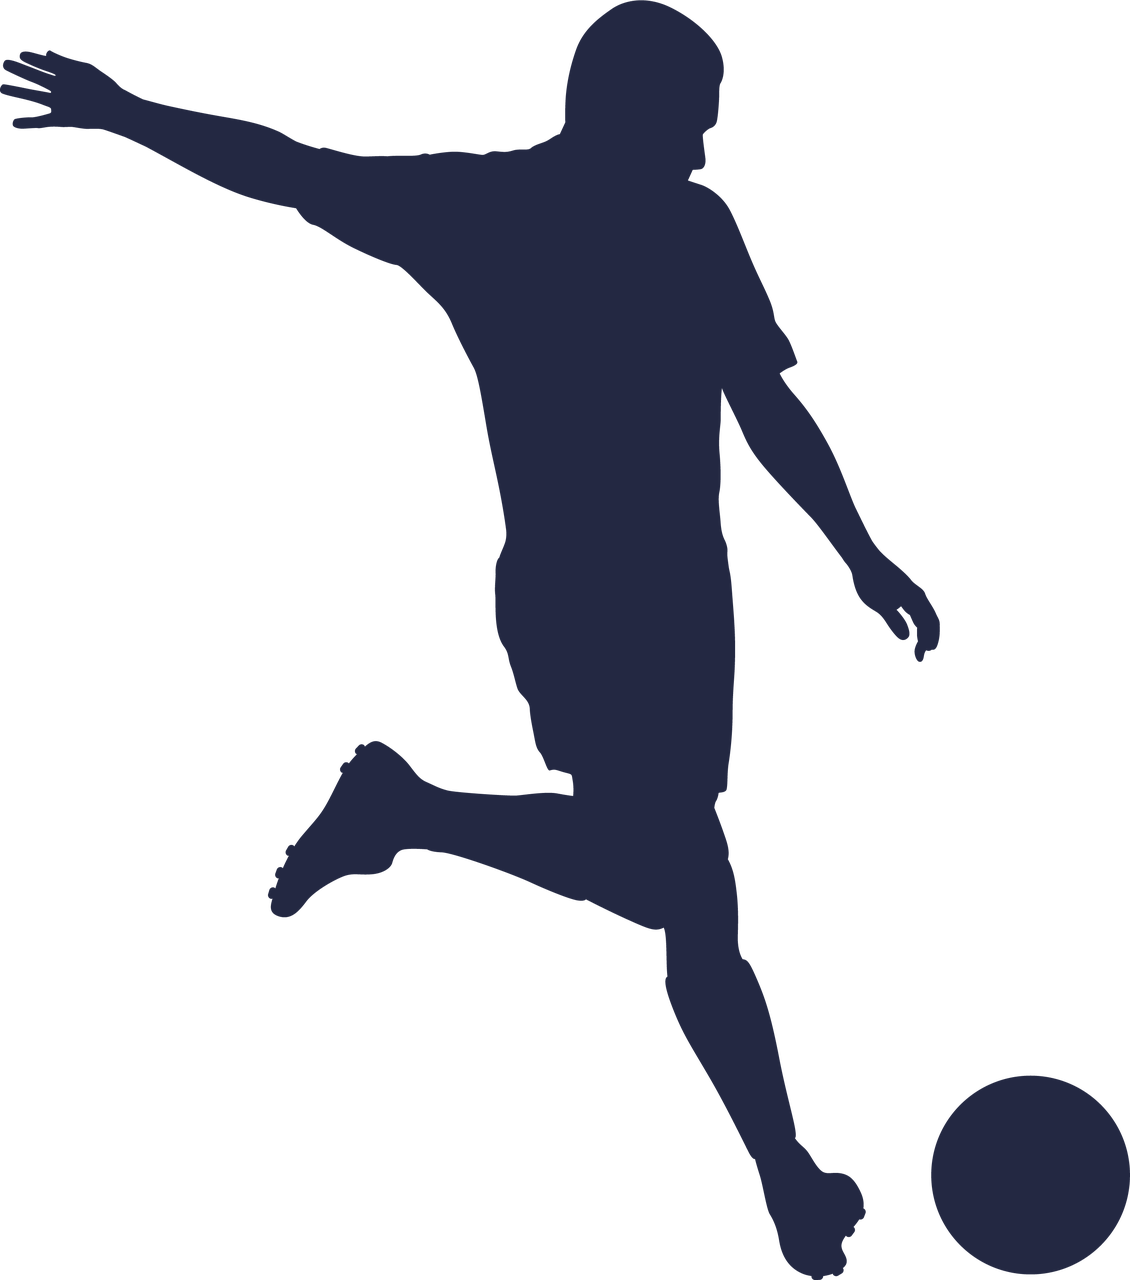 Download Soccer Silhouette #3 SVG Cut File - Snap Click Supply Co.